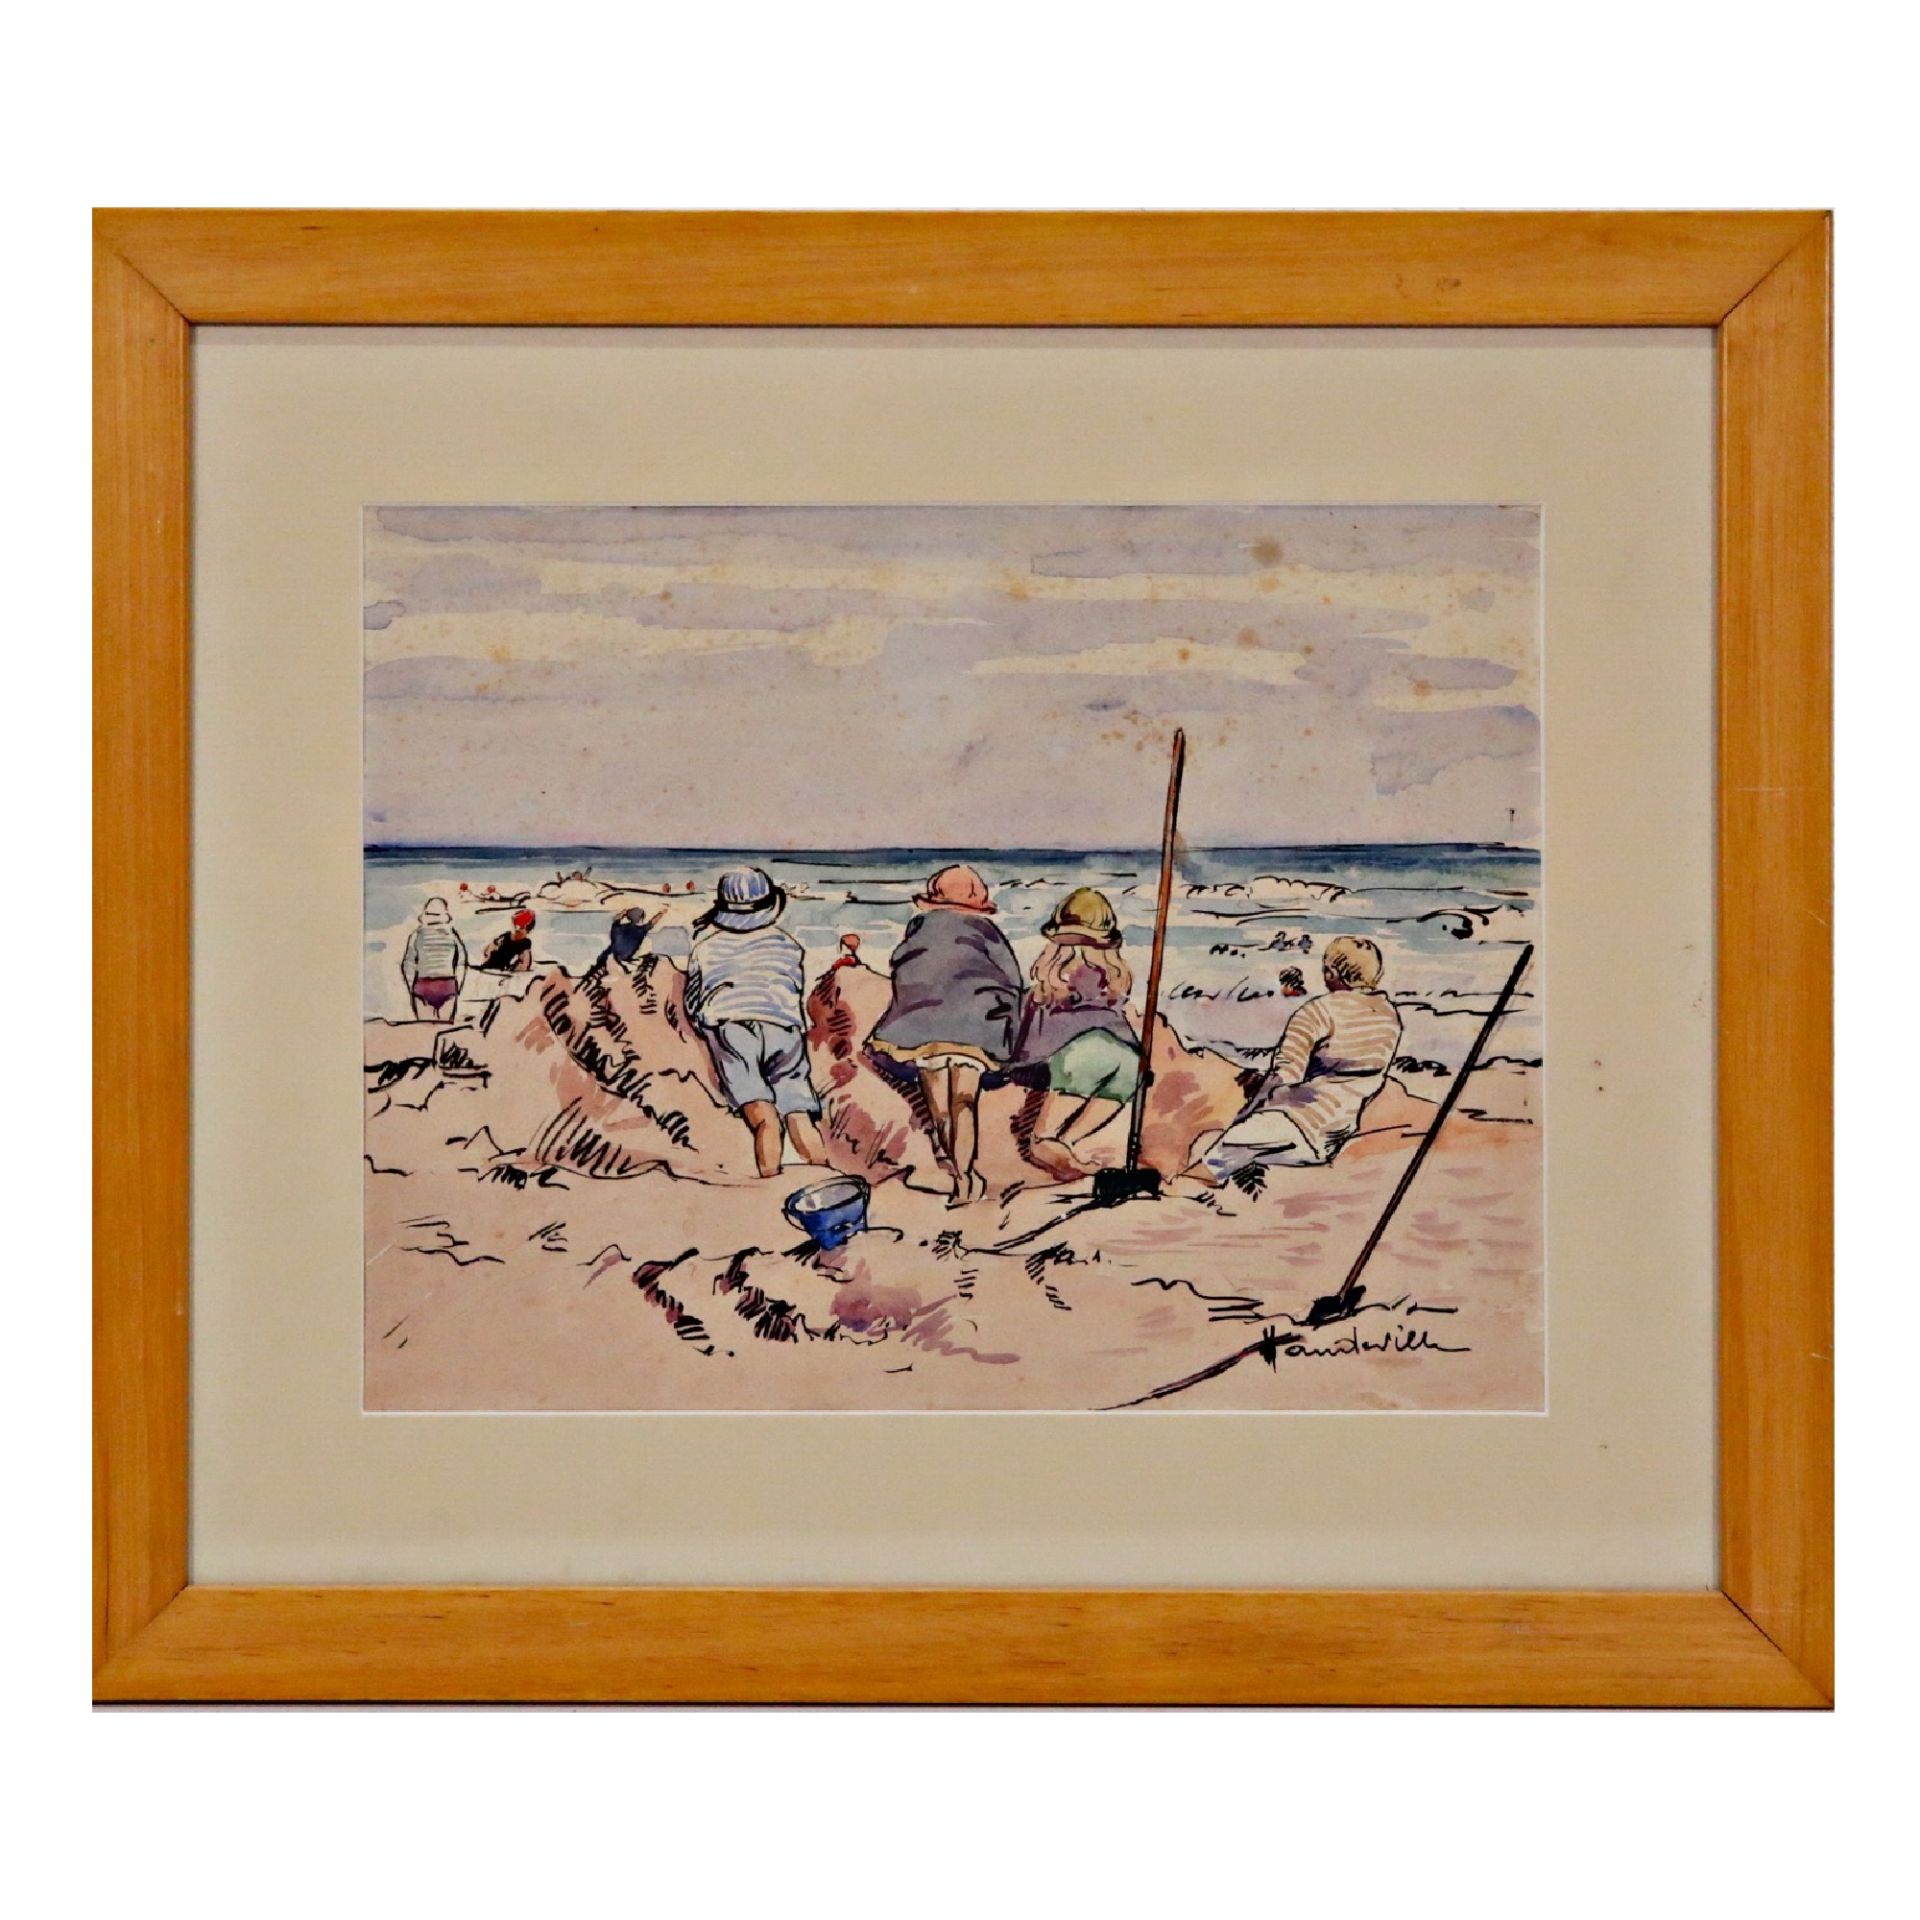 Leon HAUDEVILLE (1885-1969) "Children at the beach", watercolor on paper, French painting, 20th _.